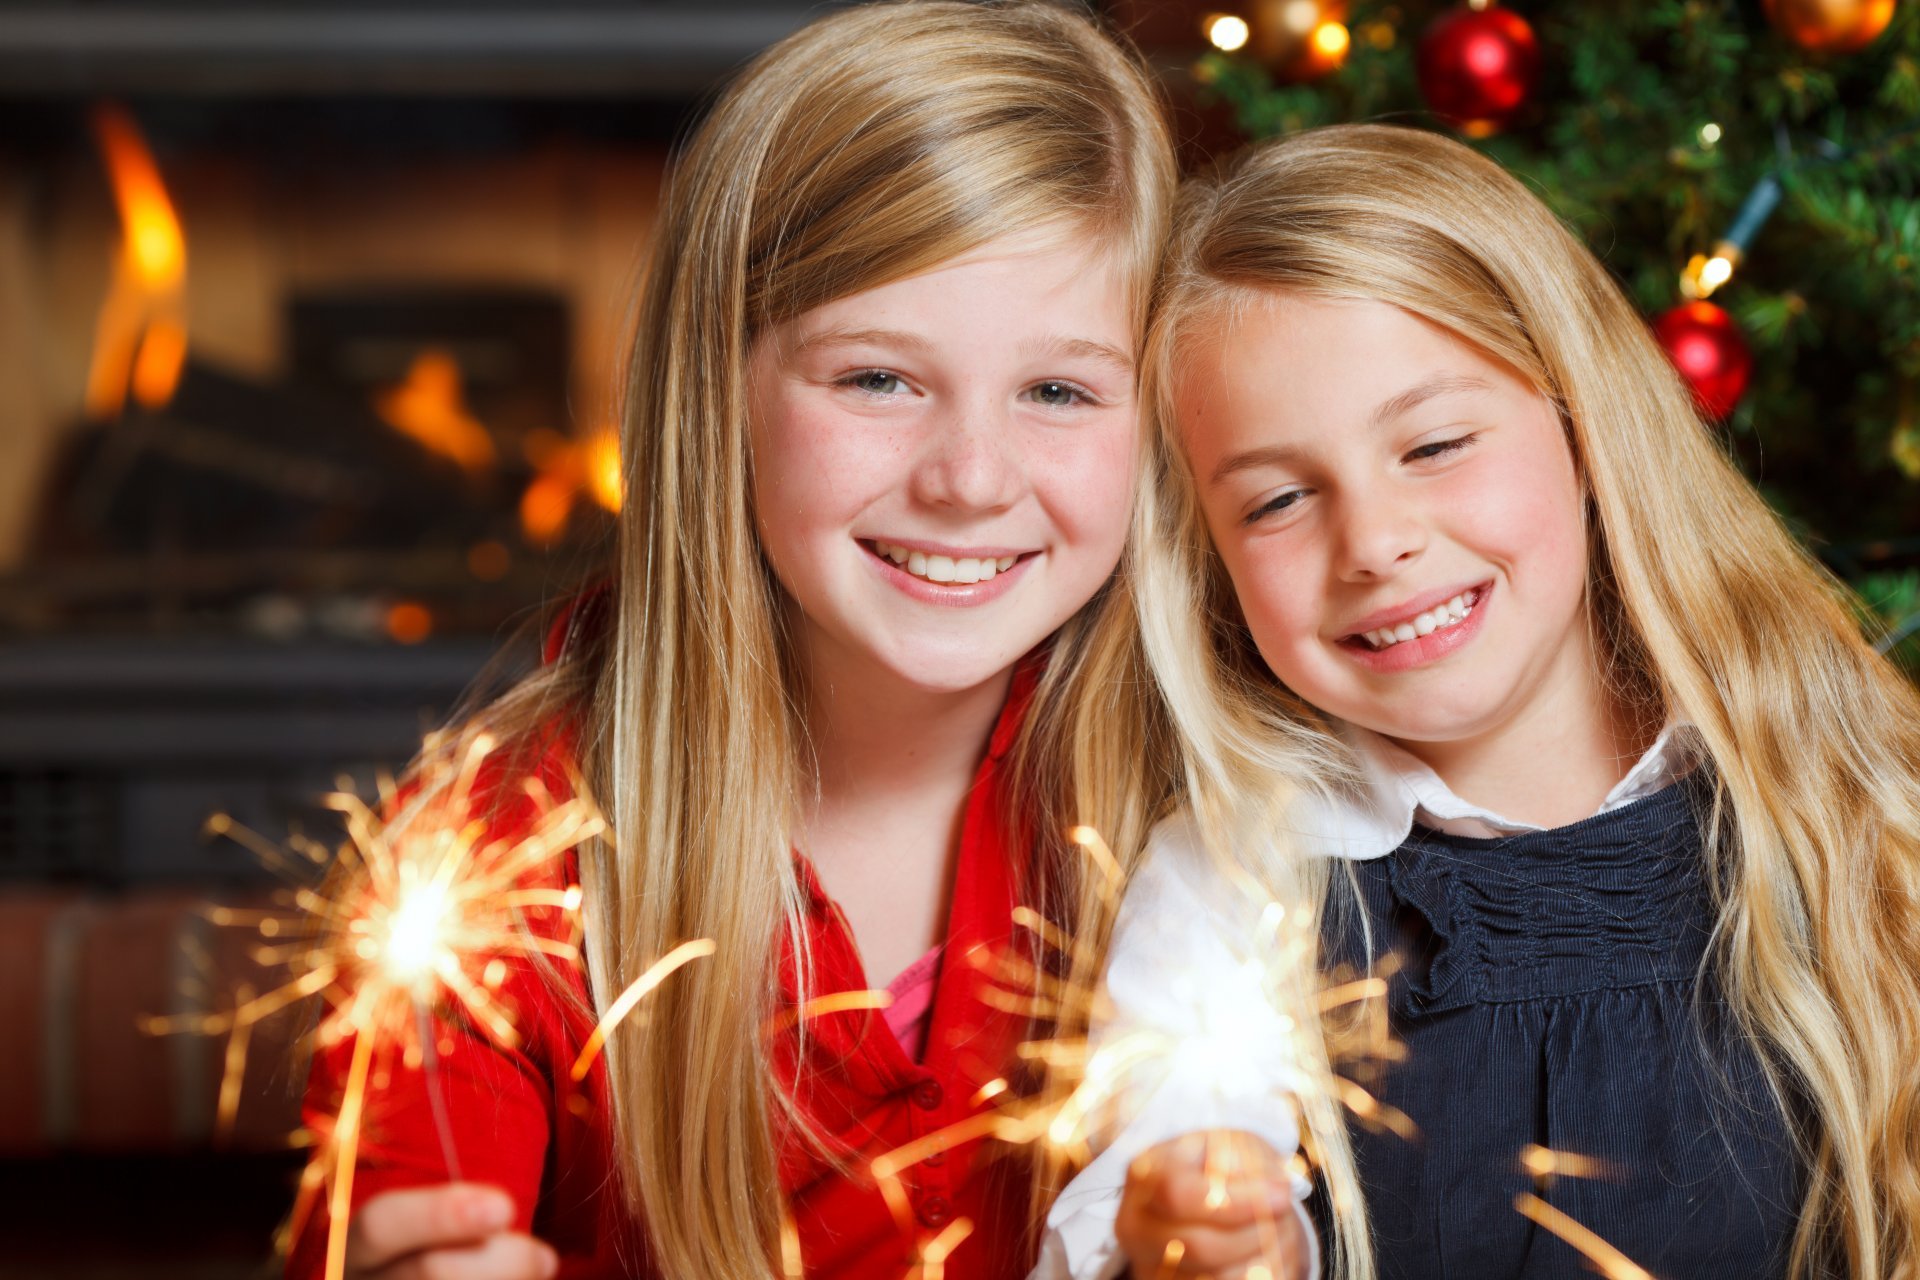 merry-christmas-new-year-sparklers-little-girls-smiling-happy-child-children-lights-merry-christmas-new-year-sparklers-little-girl-smile